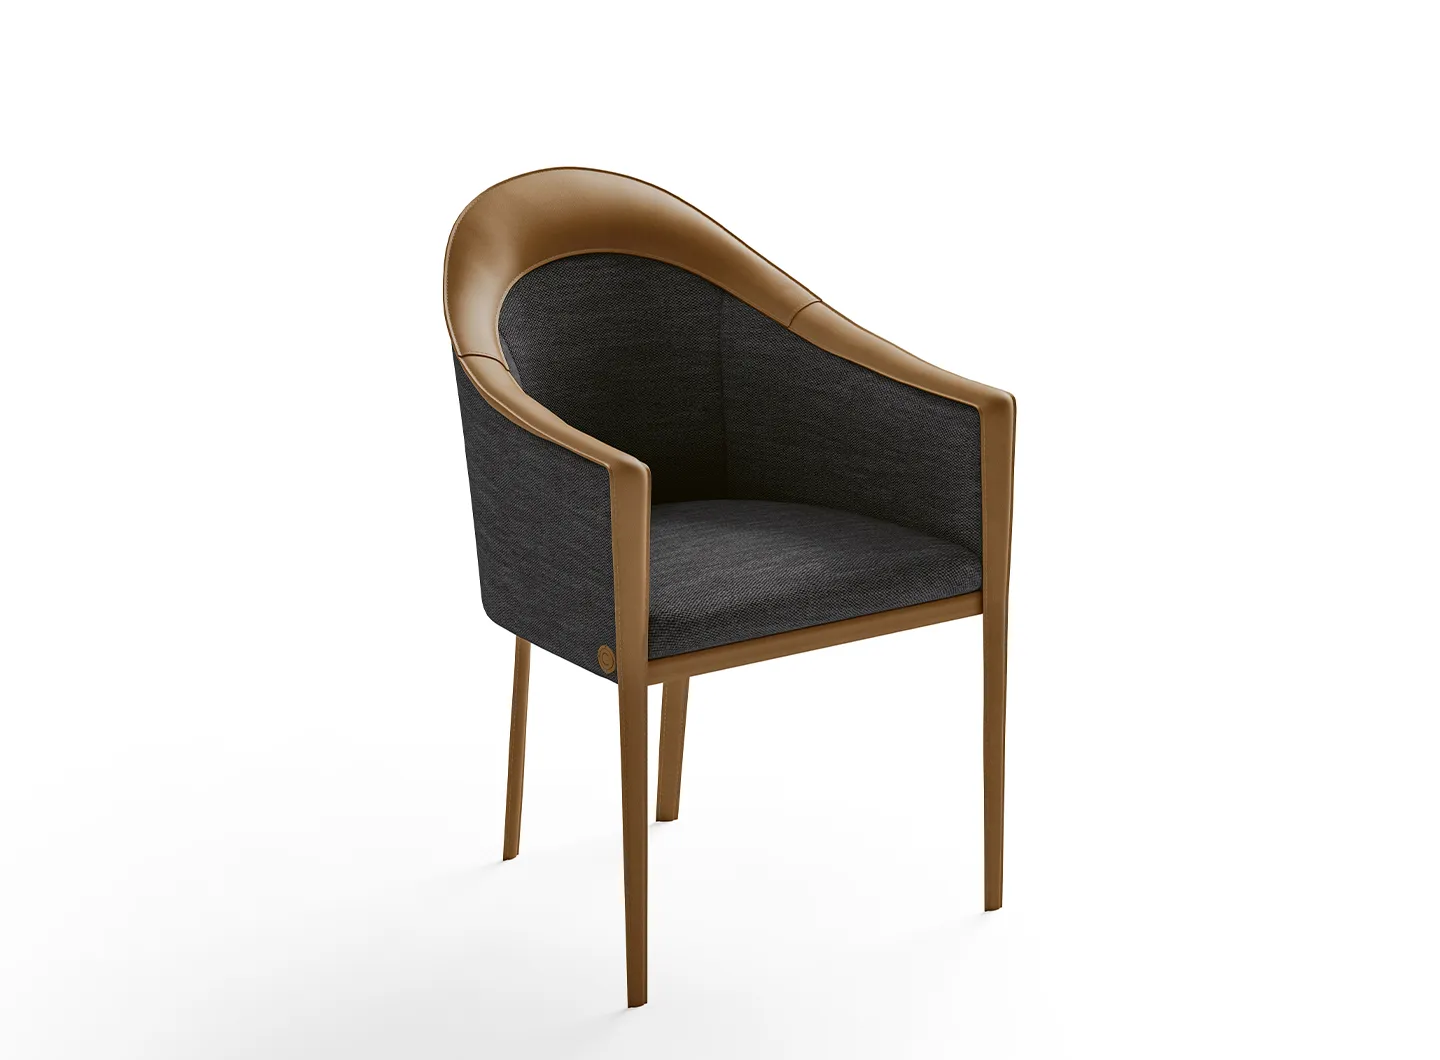 CPRN Homood-Chair with saddle leather